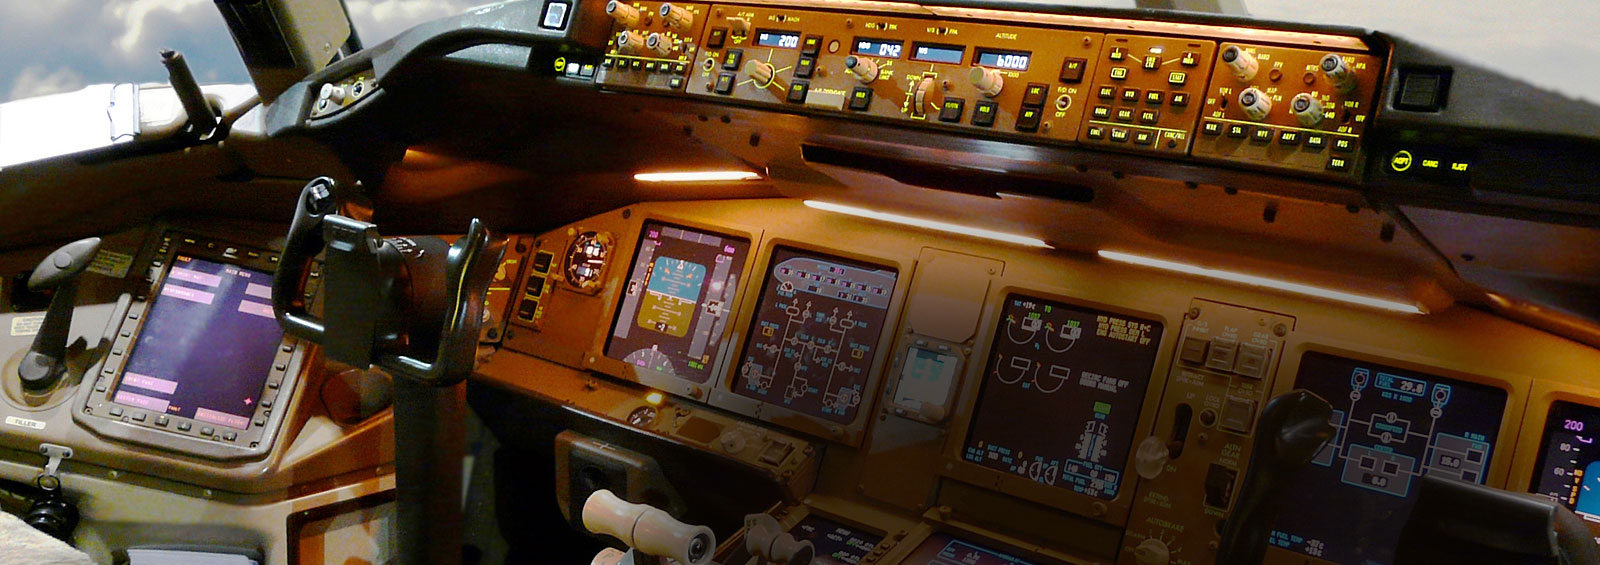 You will find our products both in: The Cabin (Panel & Displays) & Outside The Plane (Navigation & Guidance Equipment)